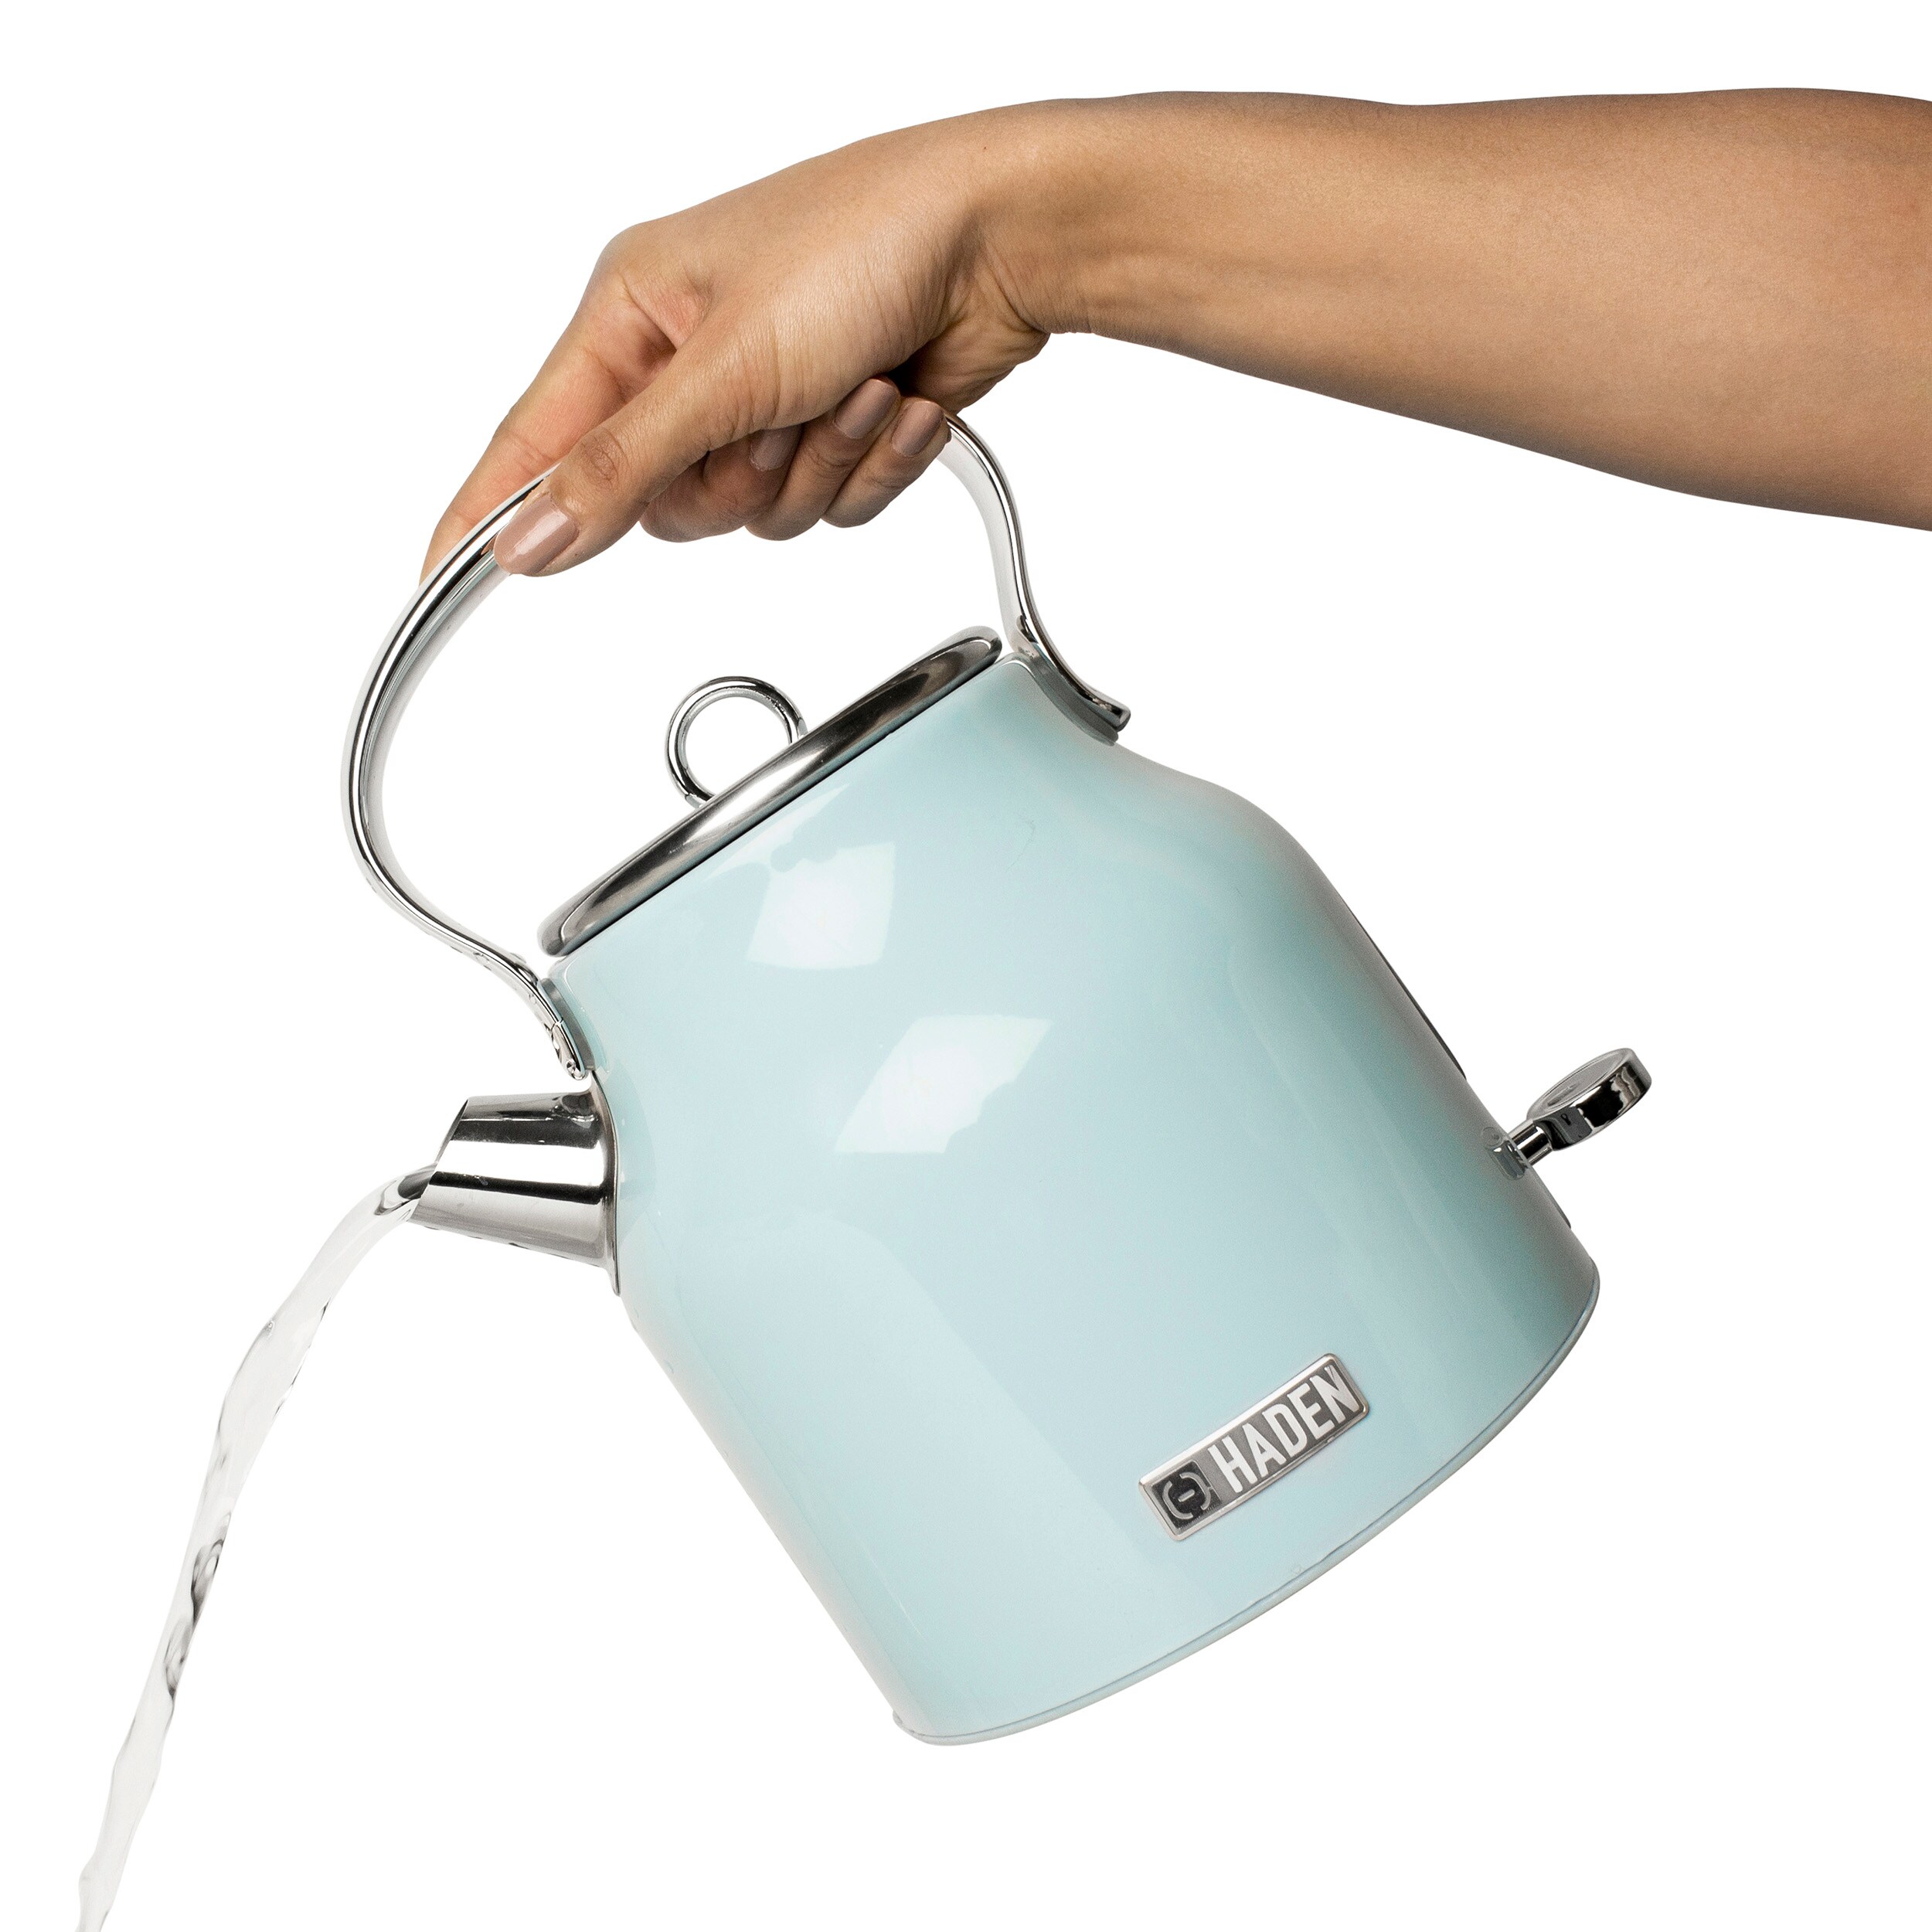 Haden Heritage Turquoise 7-Cup Corded Electric Kettle in the Water